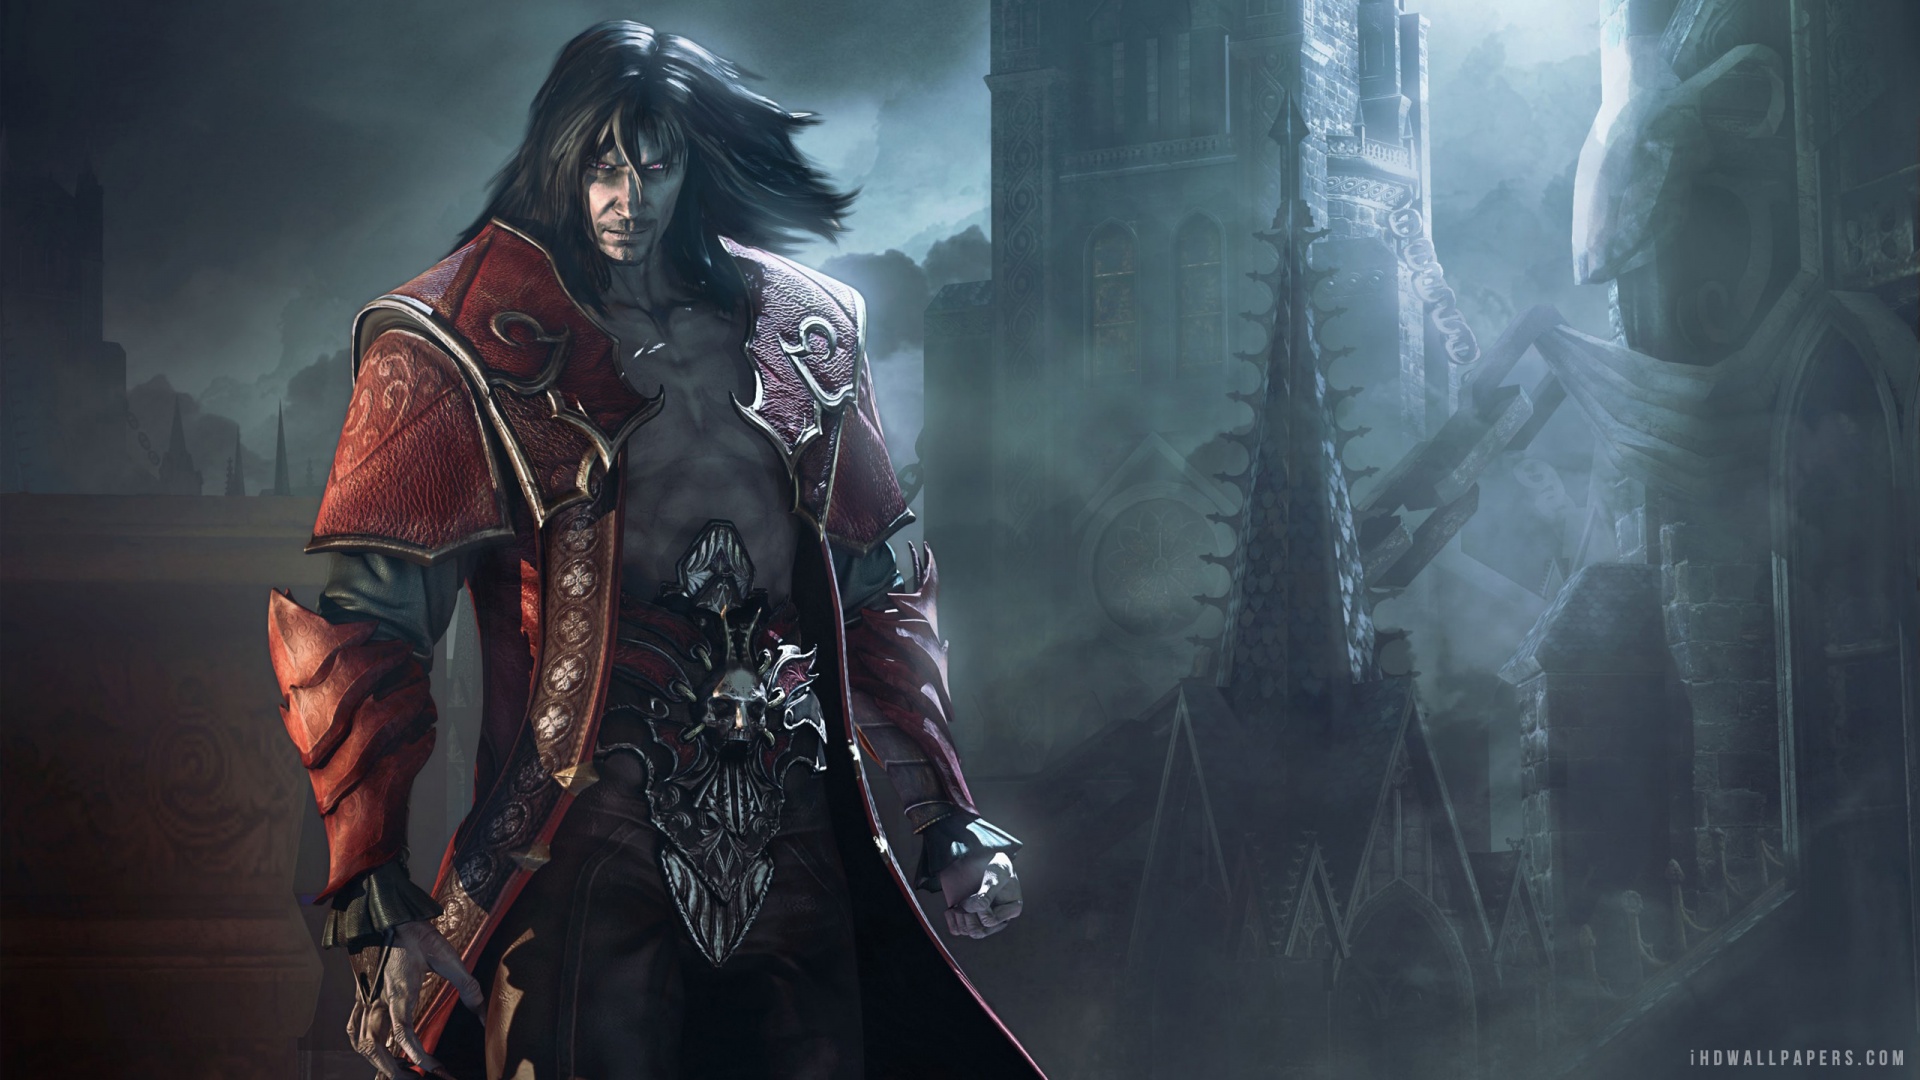 Dracula Castlevania Lords of Shadow 2 HD Wallpaper   iHD Wallpapers 1920x1080